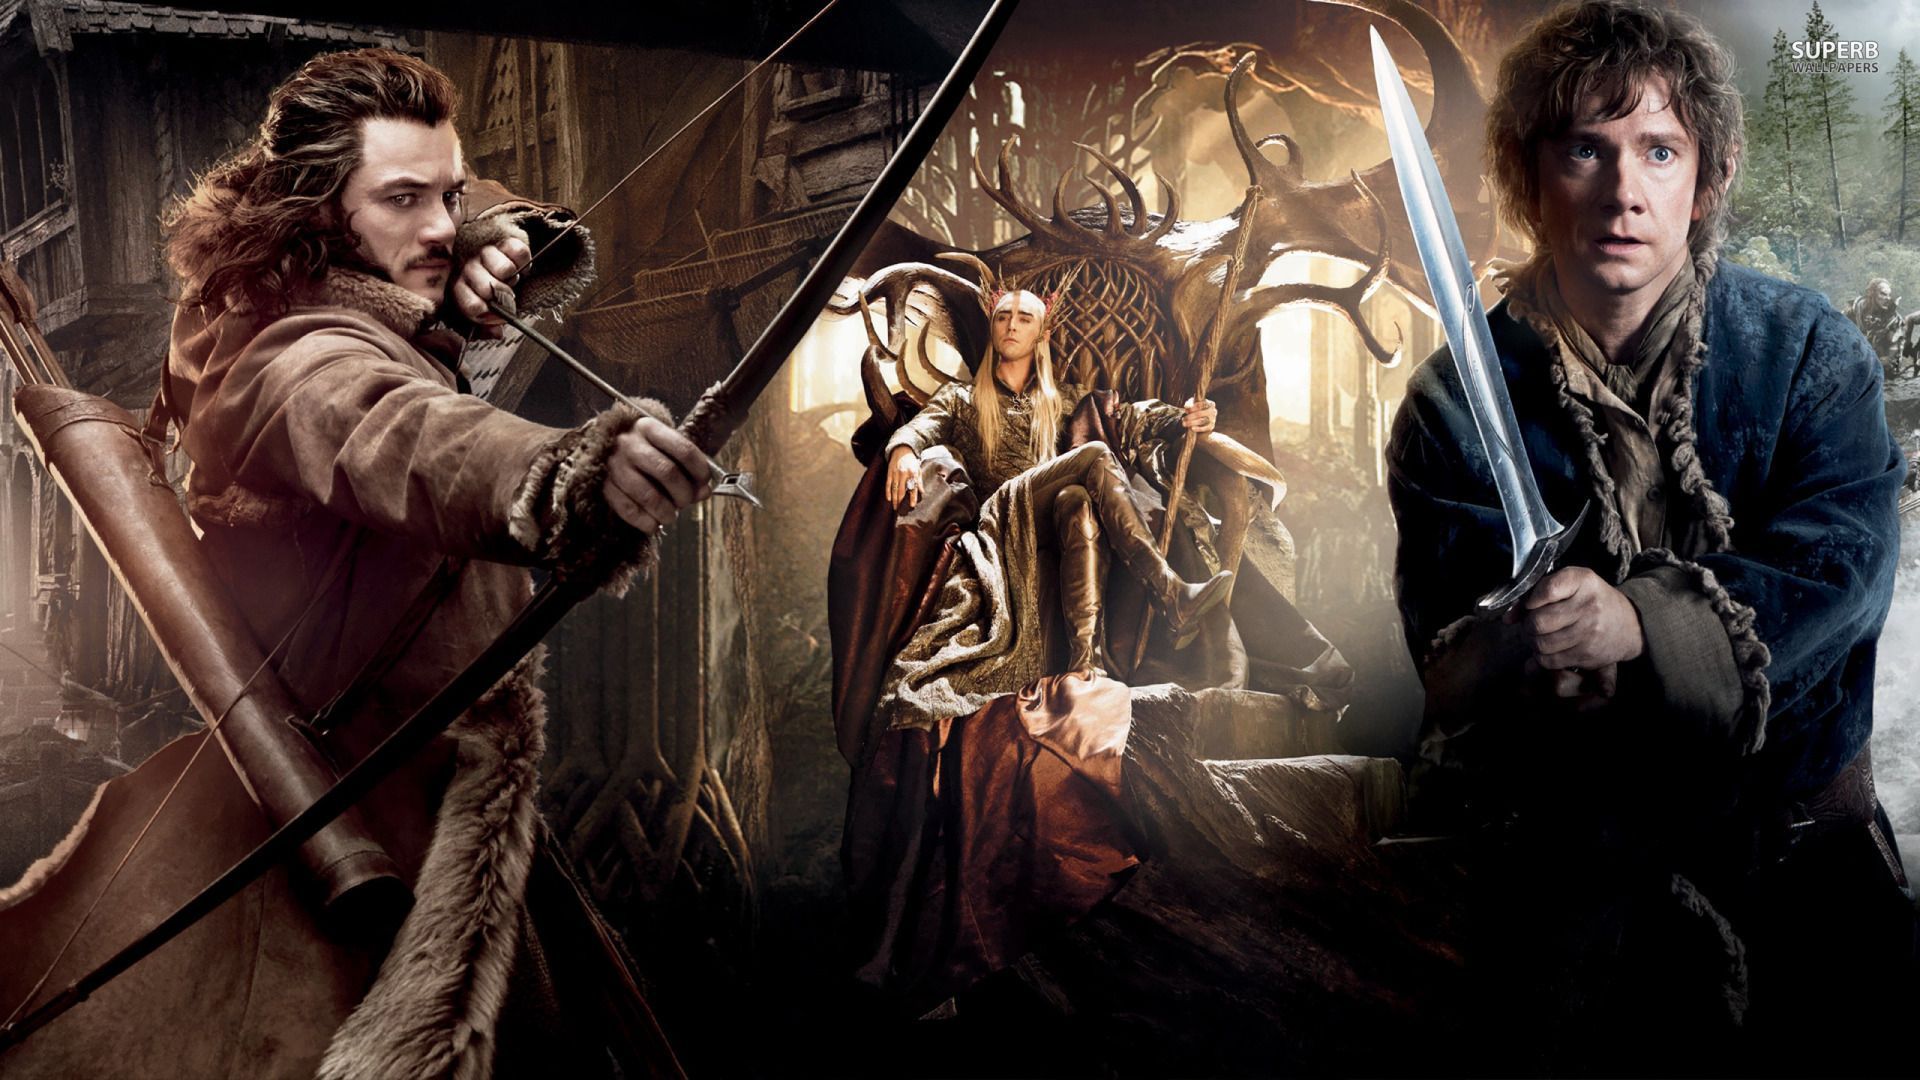 The Hobbit: The Desolation of Smaug wallpaper - Movie wallpapers ...